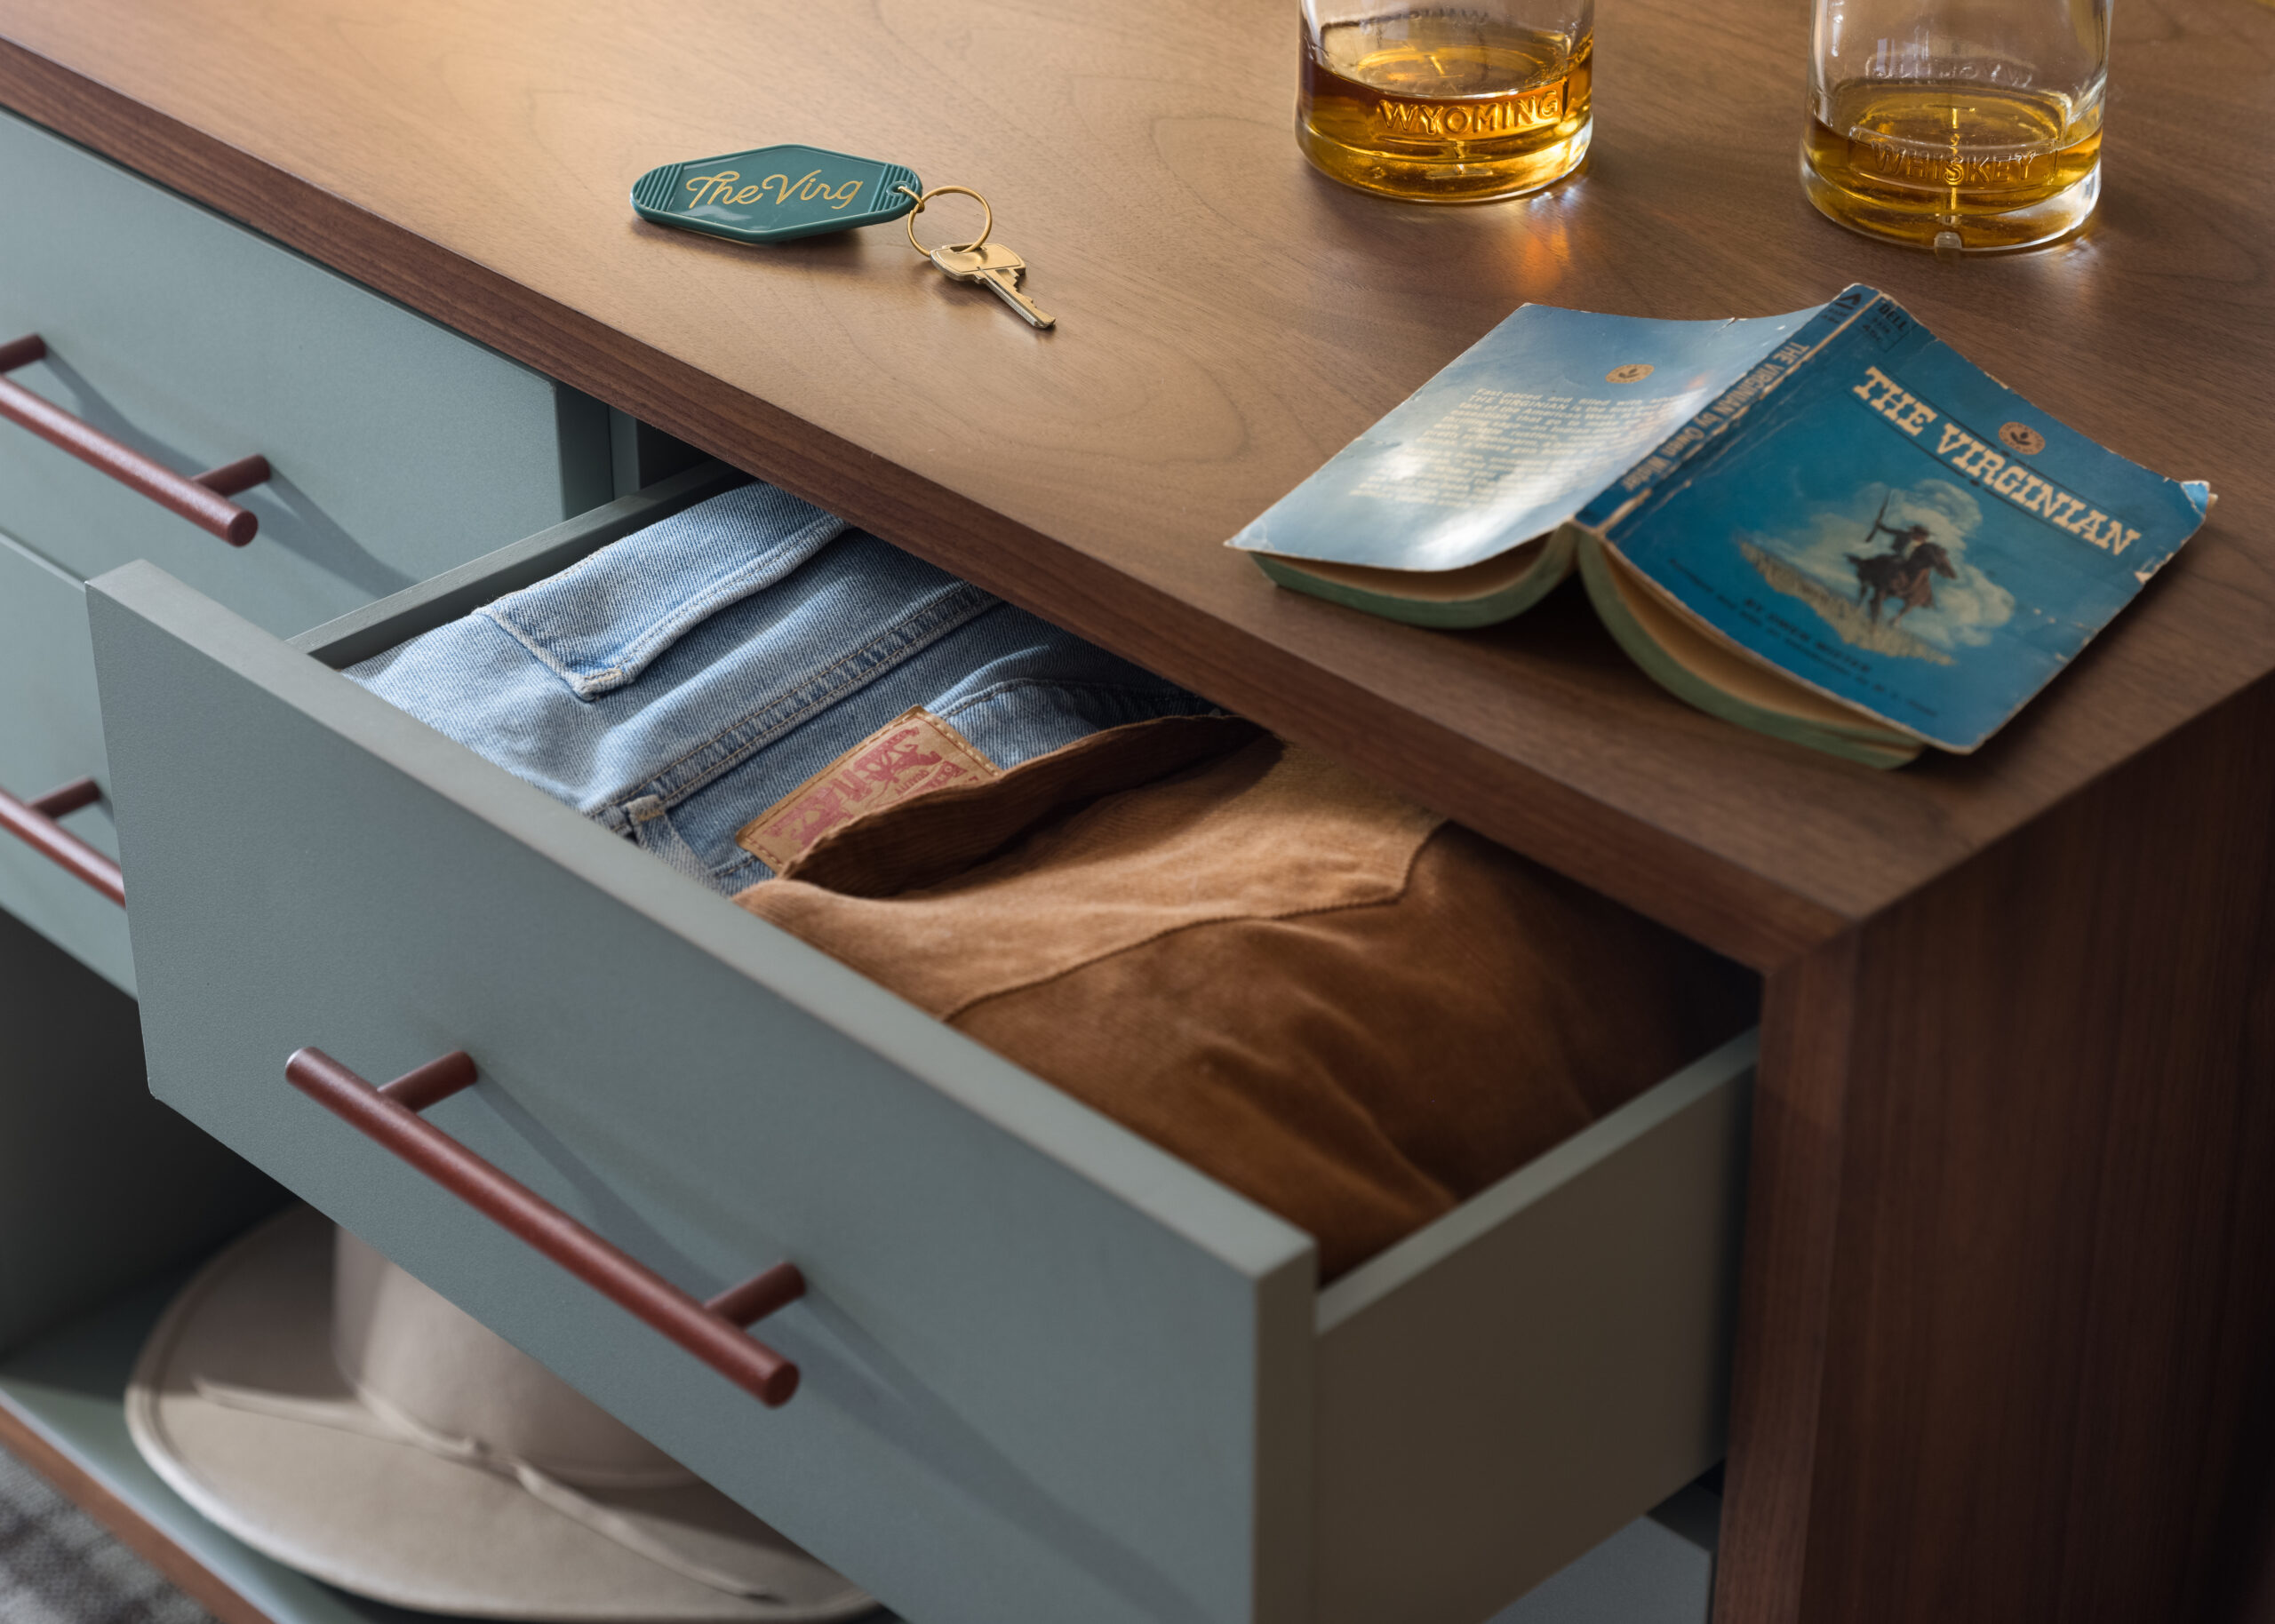 An organized drawer holds clothes; the table displays keys, notebook, and alcohol glasses neatly arranged.